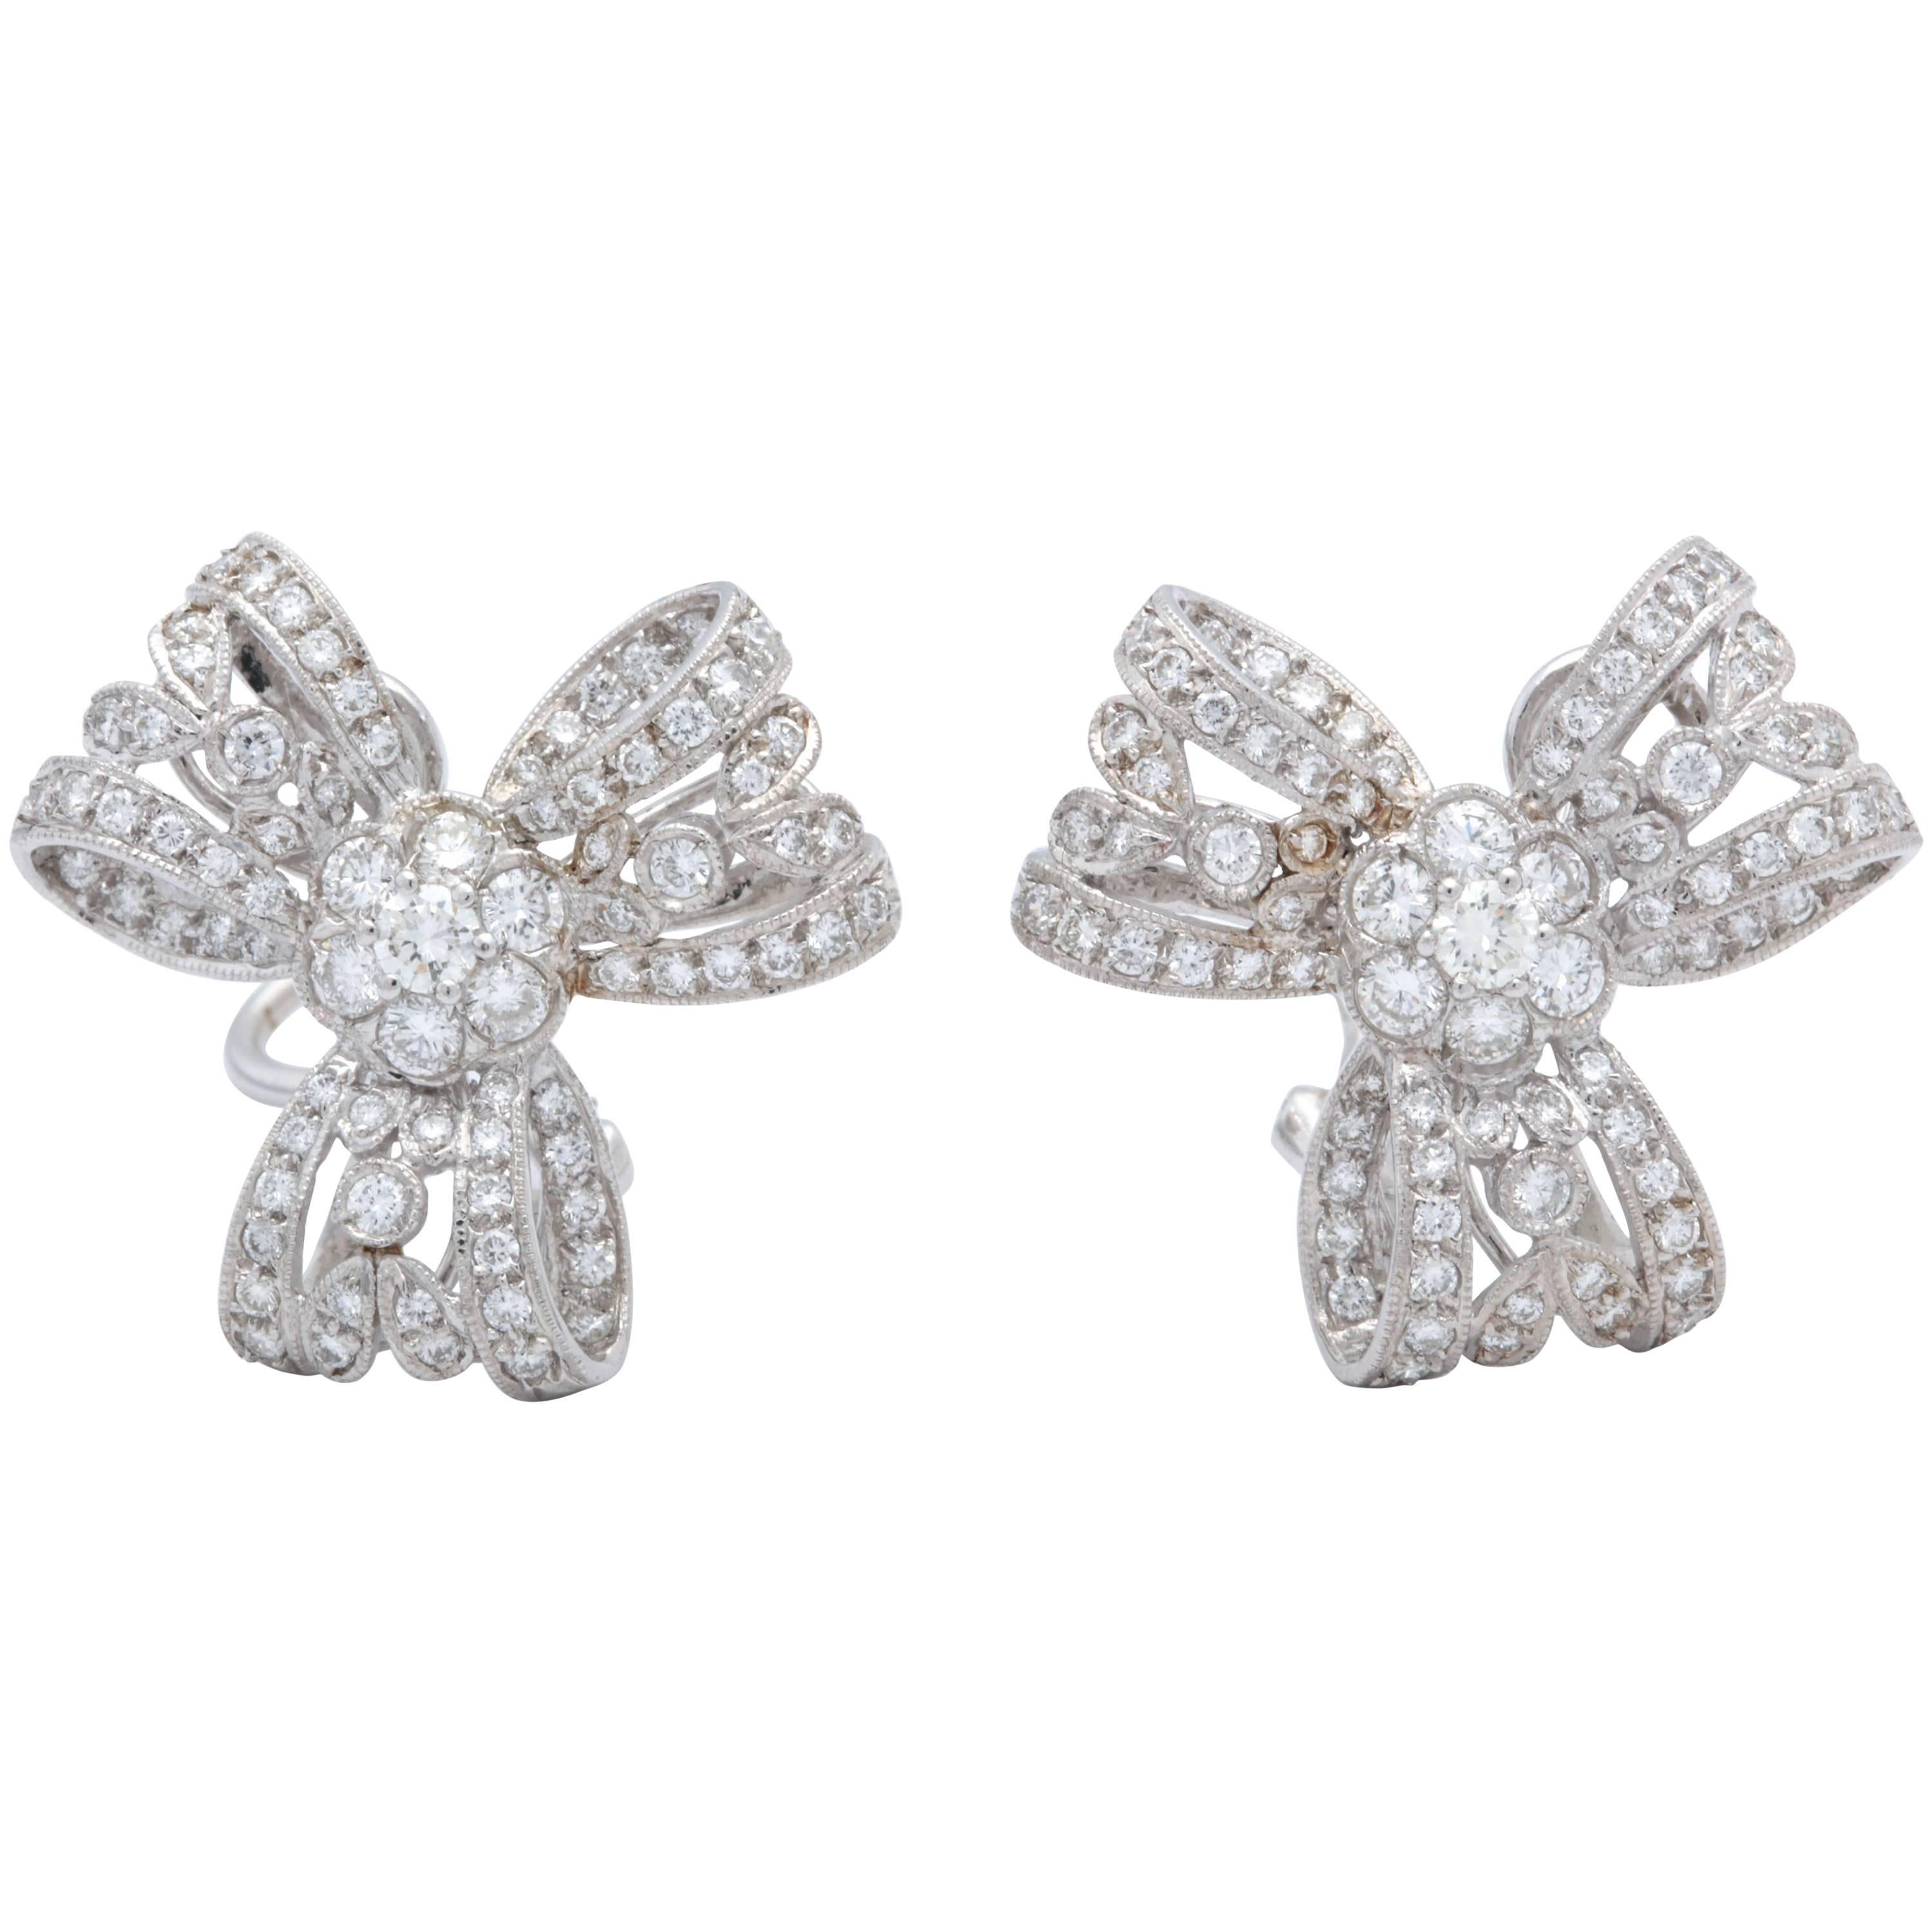 1960s Light and Airy Delicate Bow Knot Motif Diamond, White Gold Earclips